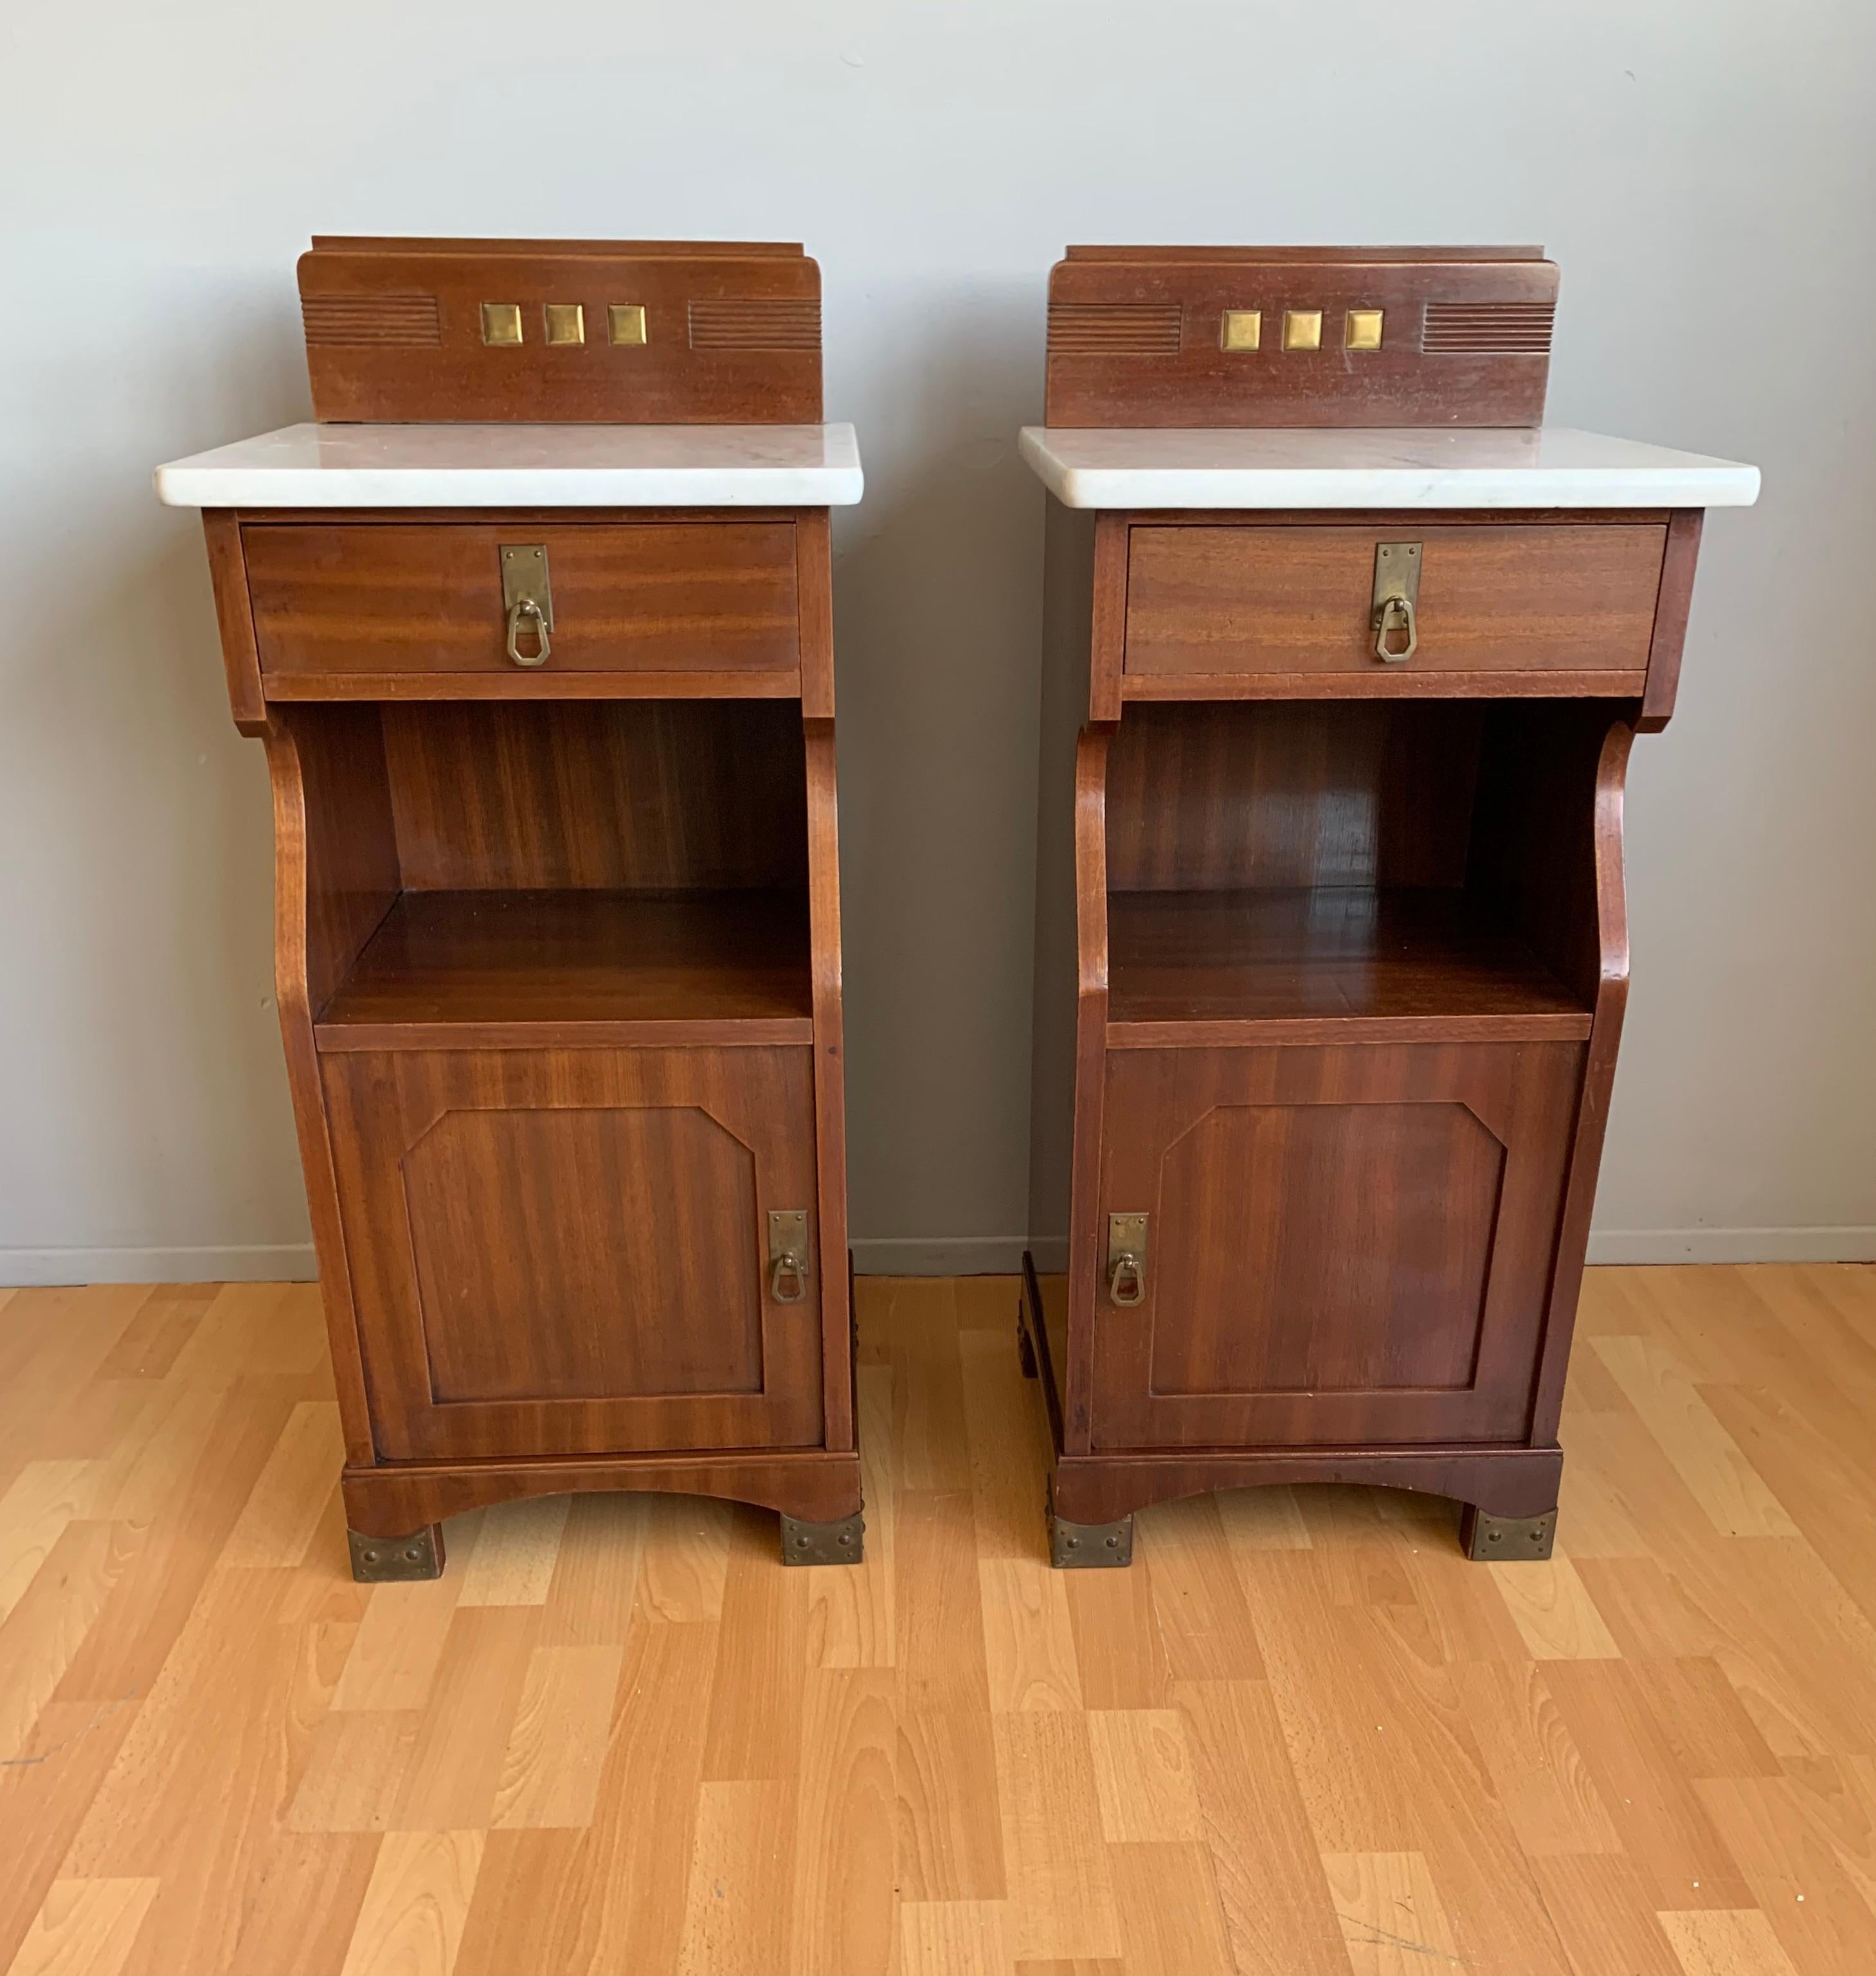 Perfect pair of antique European nightstands, similar to the American Mission style.

If you are looking for a pair of truly timeless and beautifully handcrafted bedside cabinets then this Arts & Crafts pair could be perfect for you. This